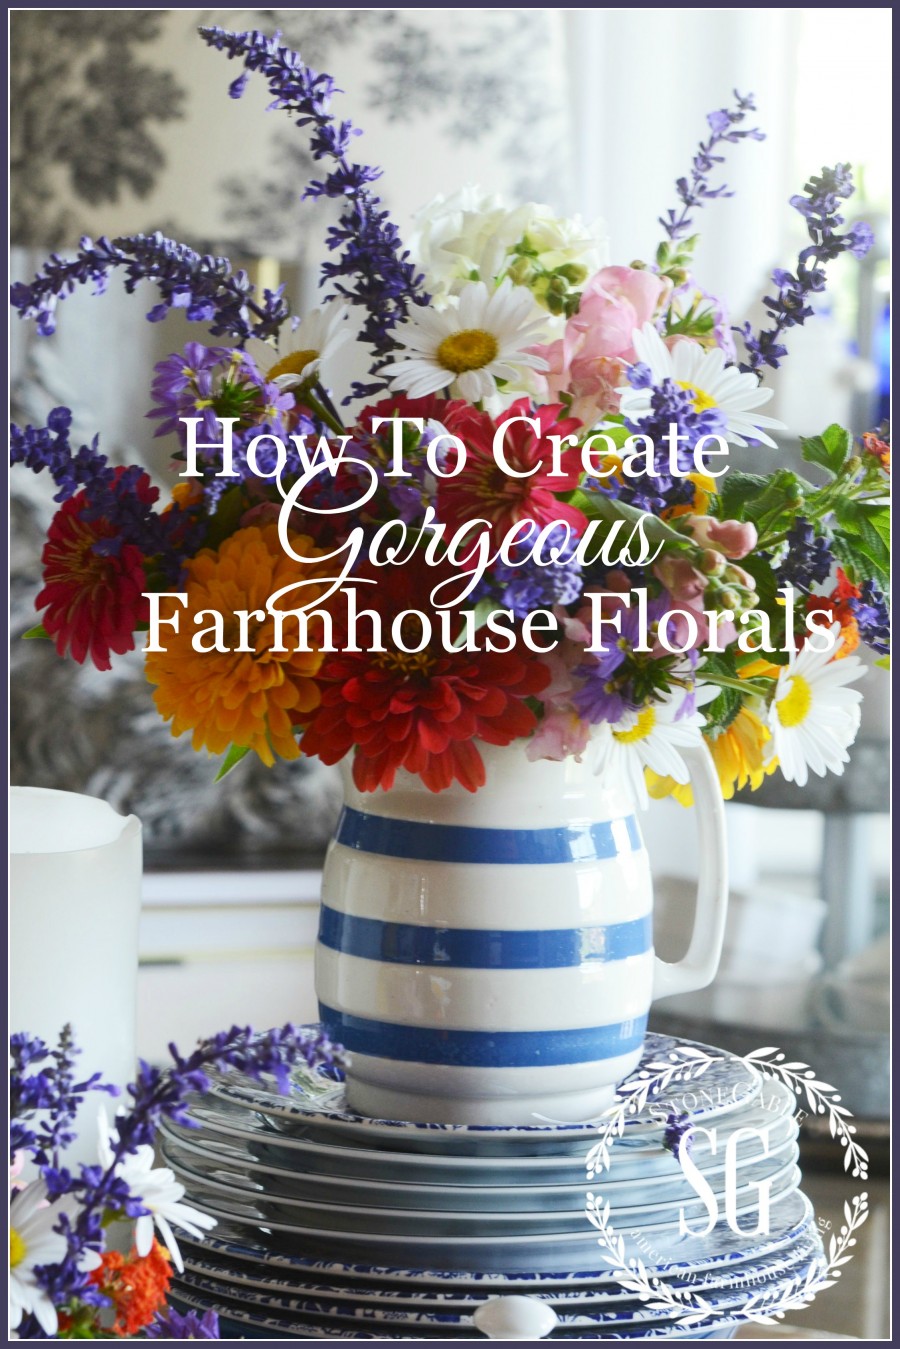 HOW TO CREATE GORGEOUS FARMHOUSE FLORALS-Easy tips for charming farmhouse influenced arrangements